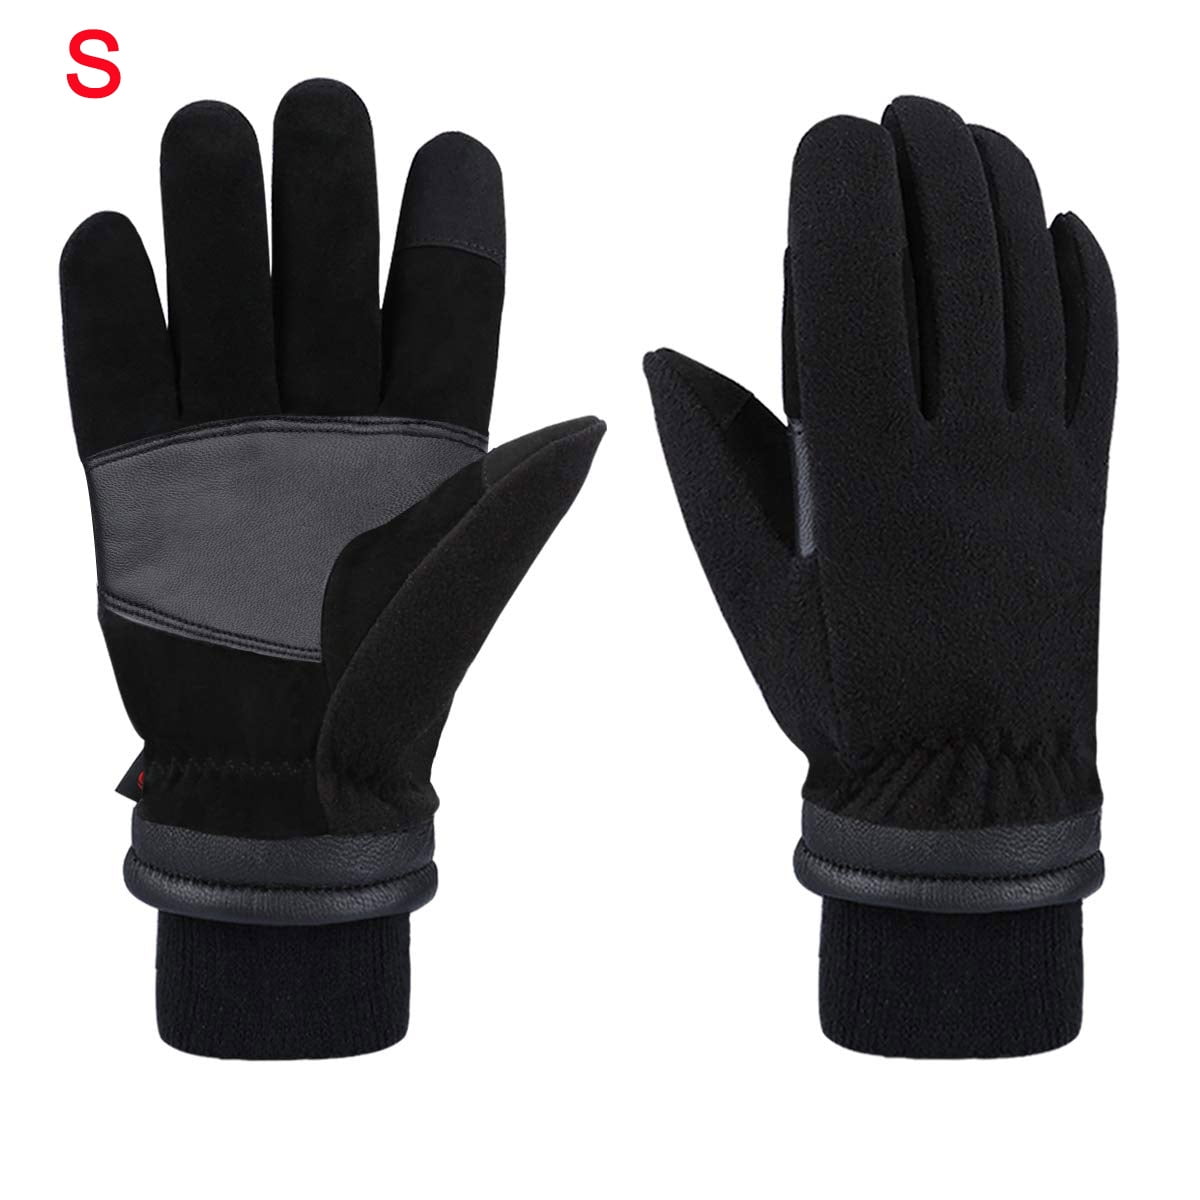 12/24 Pairs PU Hand Palm Protect Gloves Builders Worker Safety Glove Black S M L 